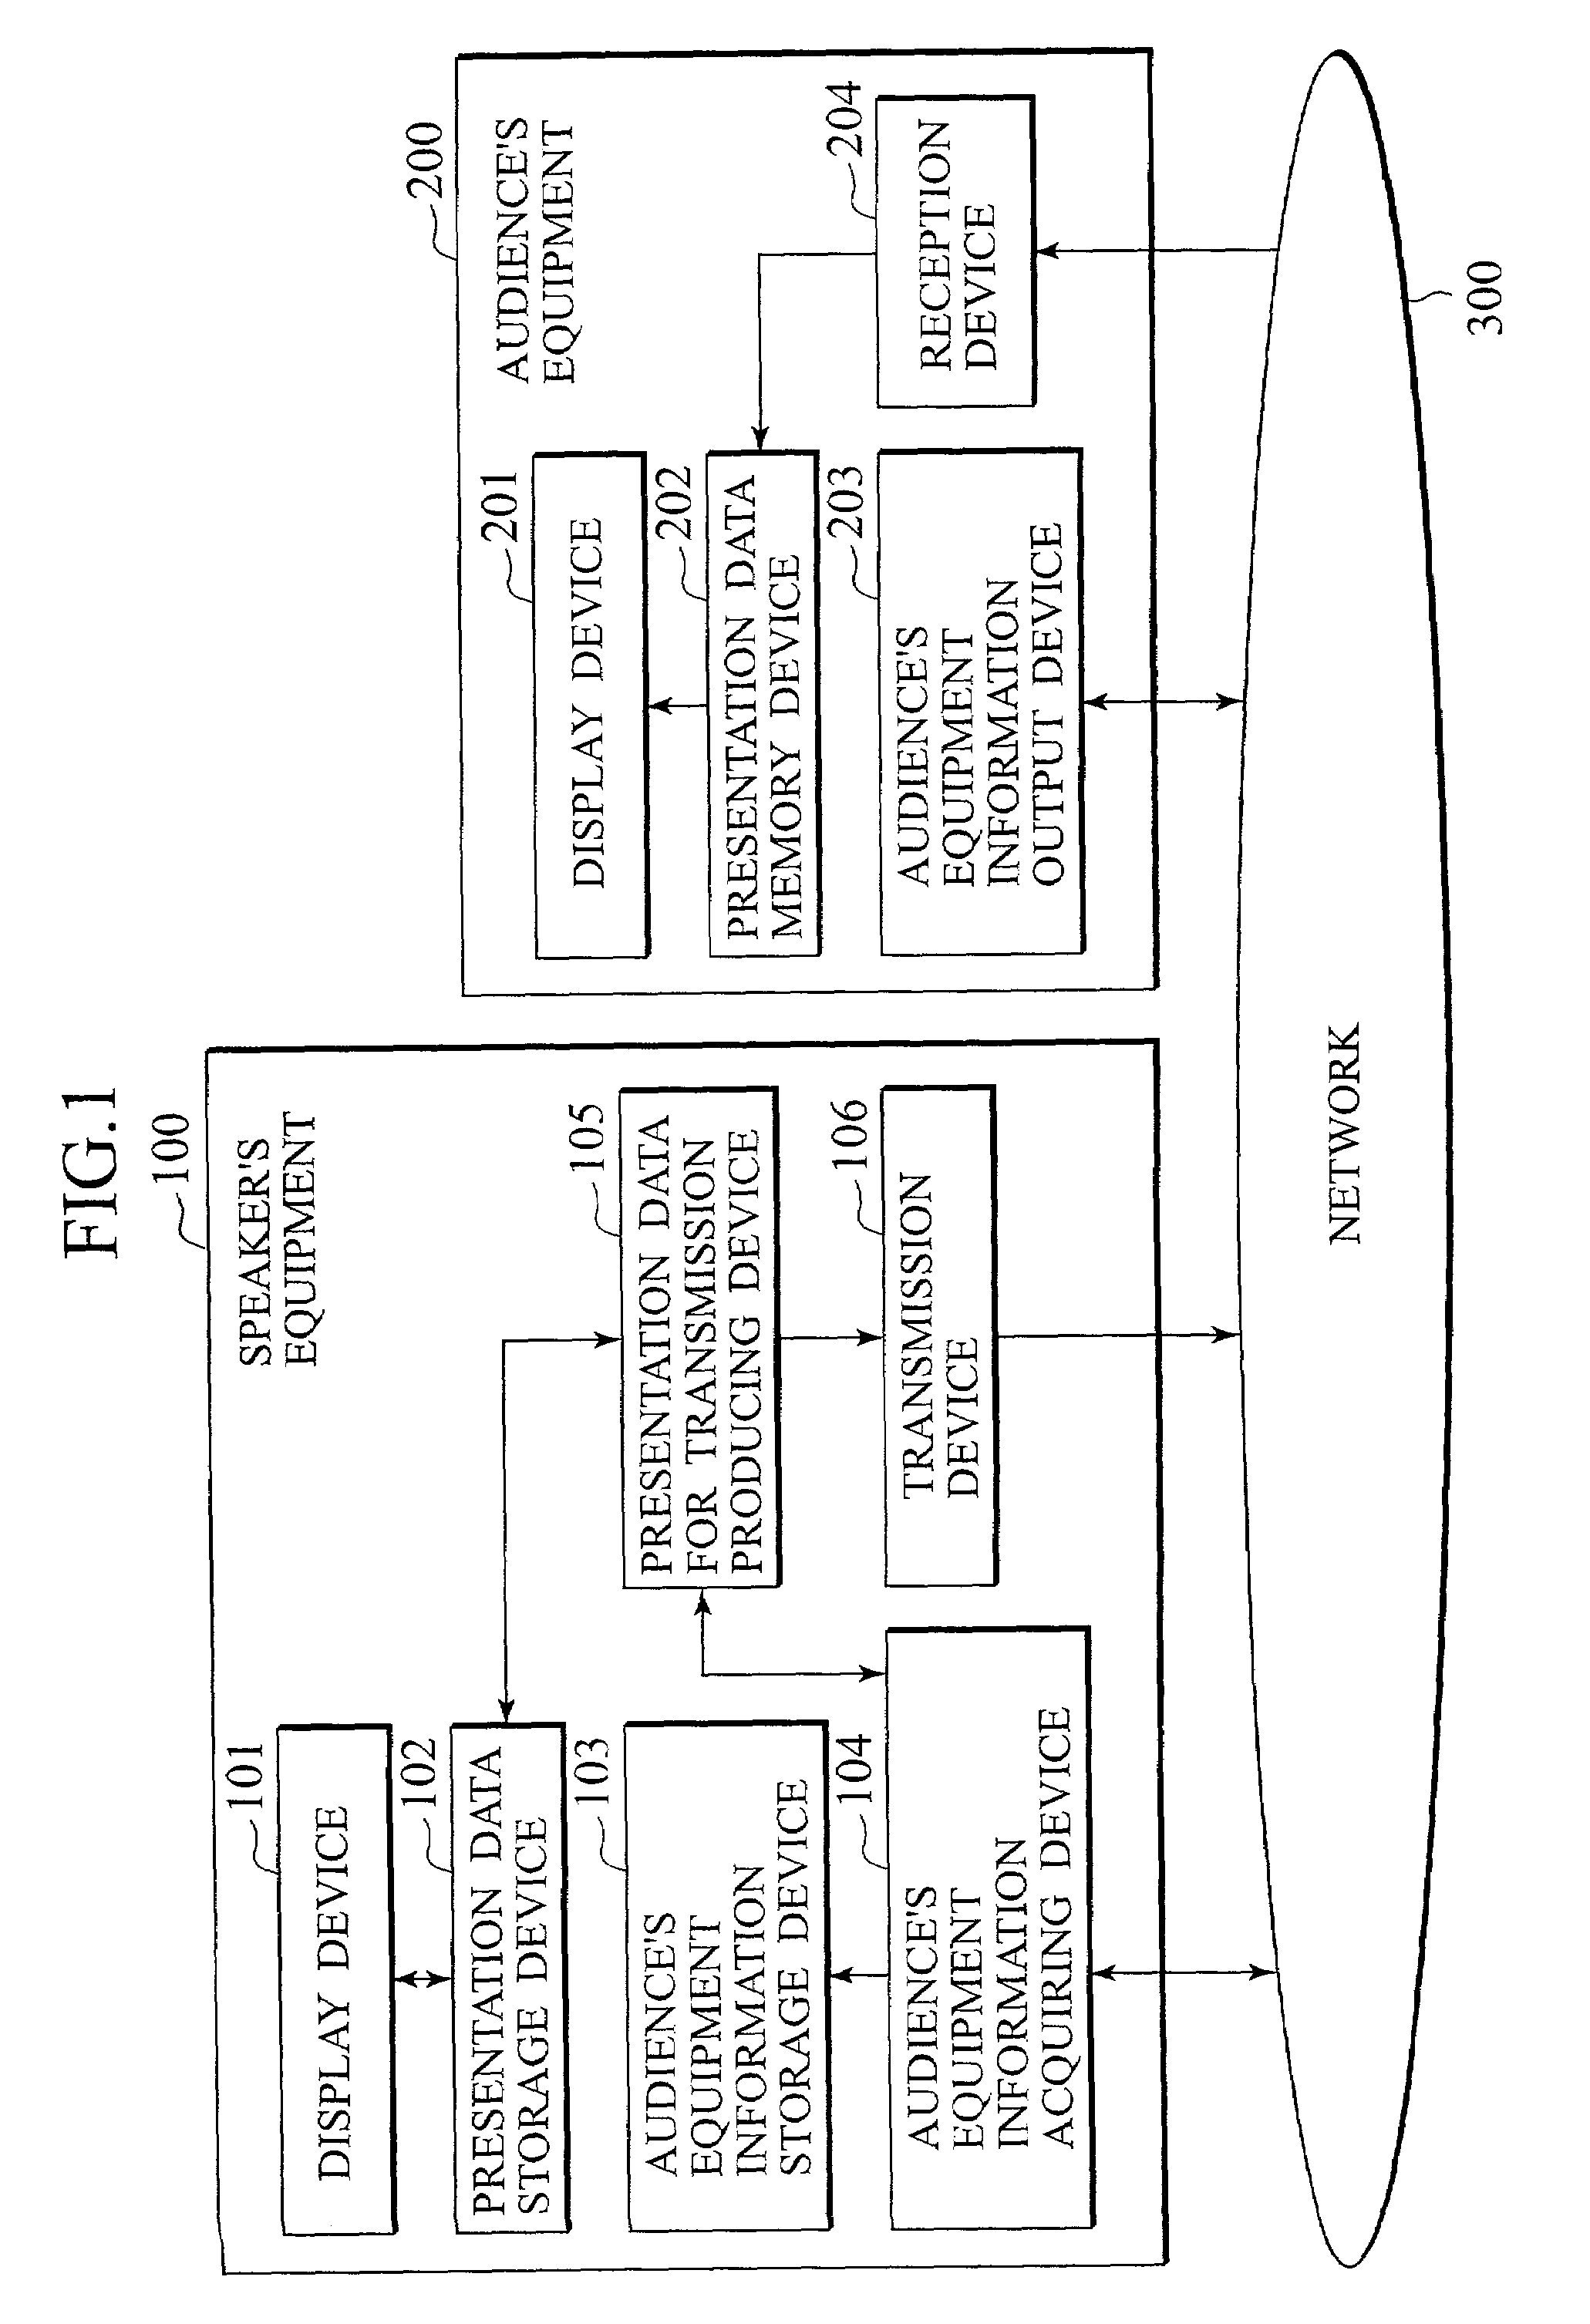 Electronic conference system using presentation data processing based on audience equipment information